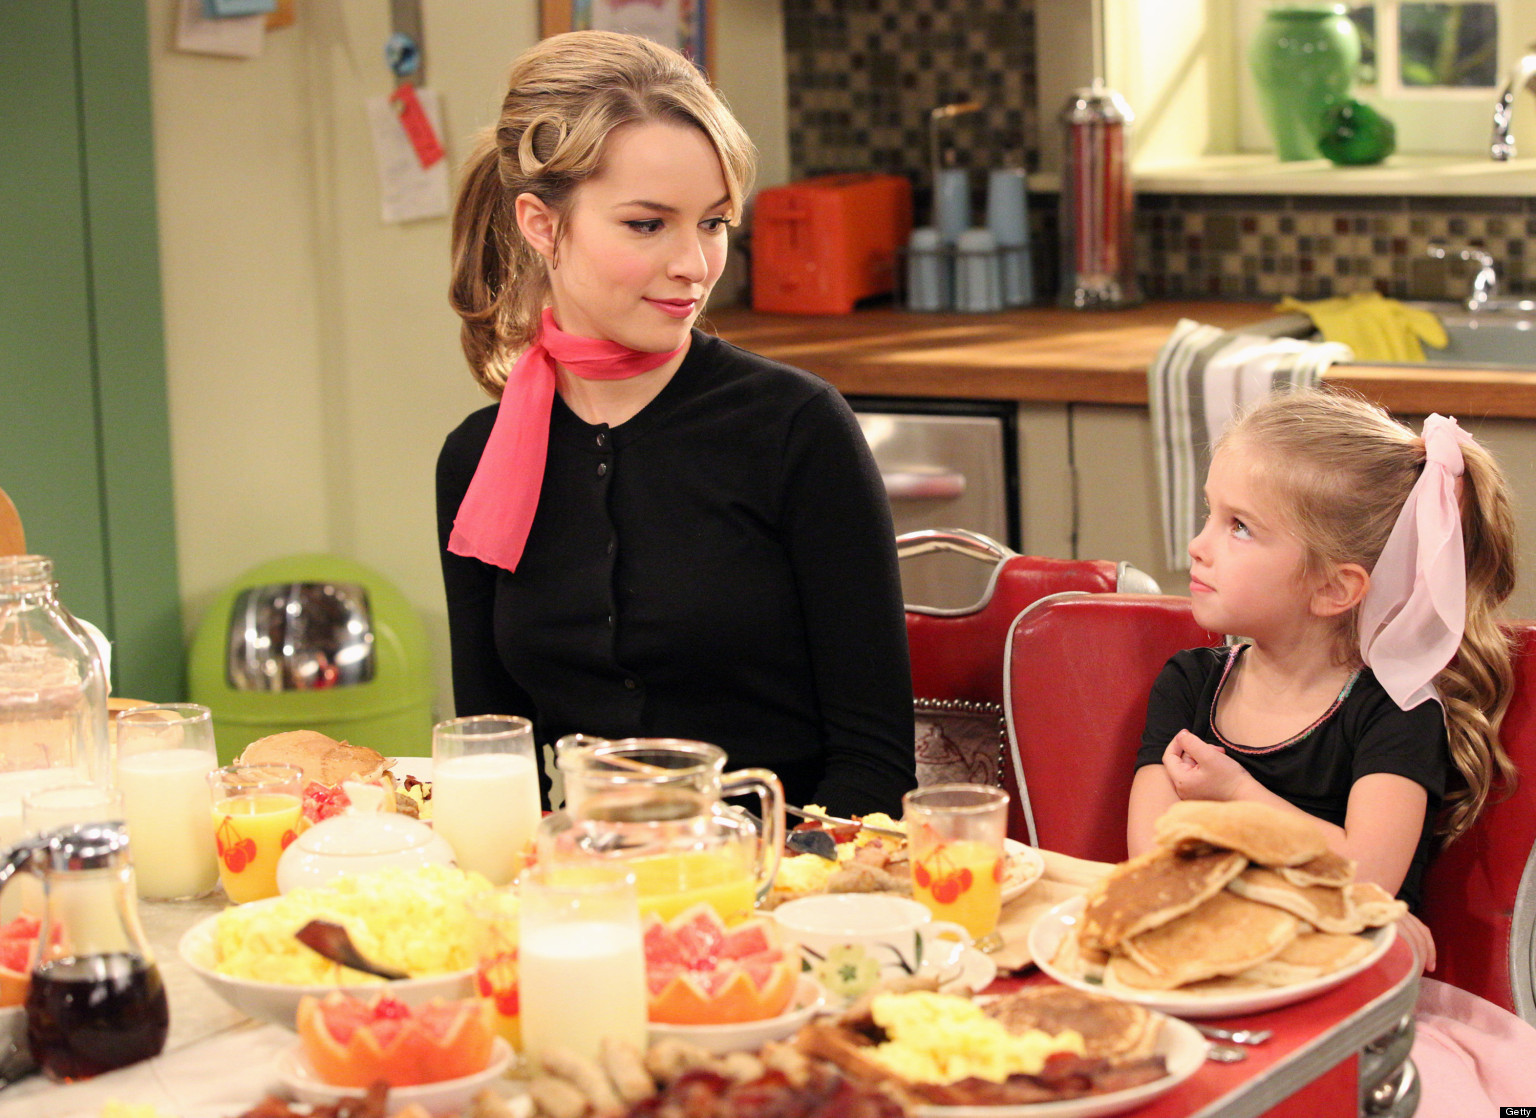 15 Important Life Lessons From 'Good Luck Charlie,' As Told By GIFs ...